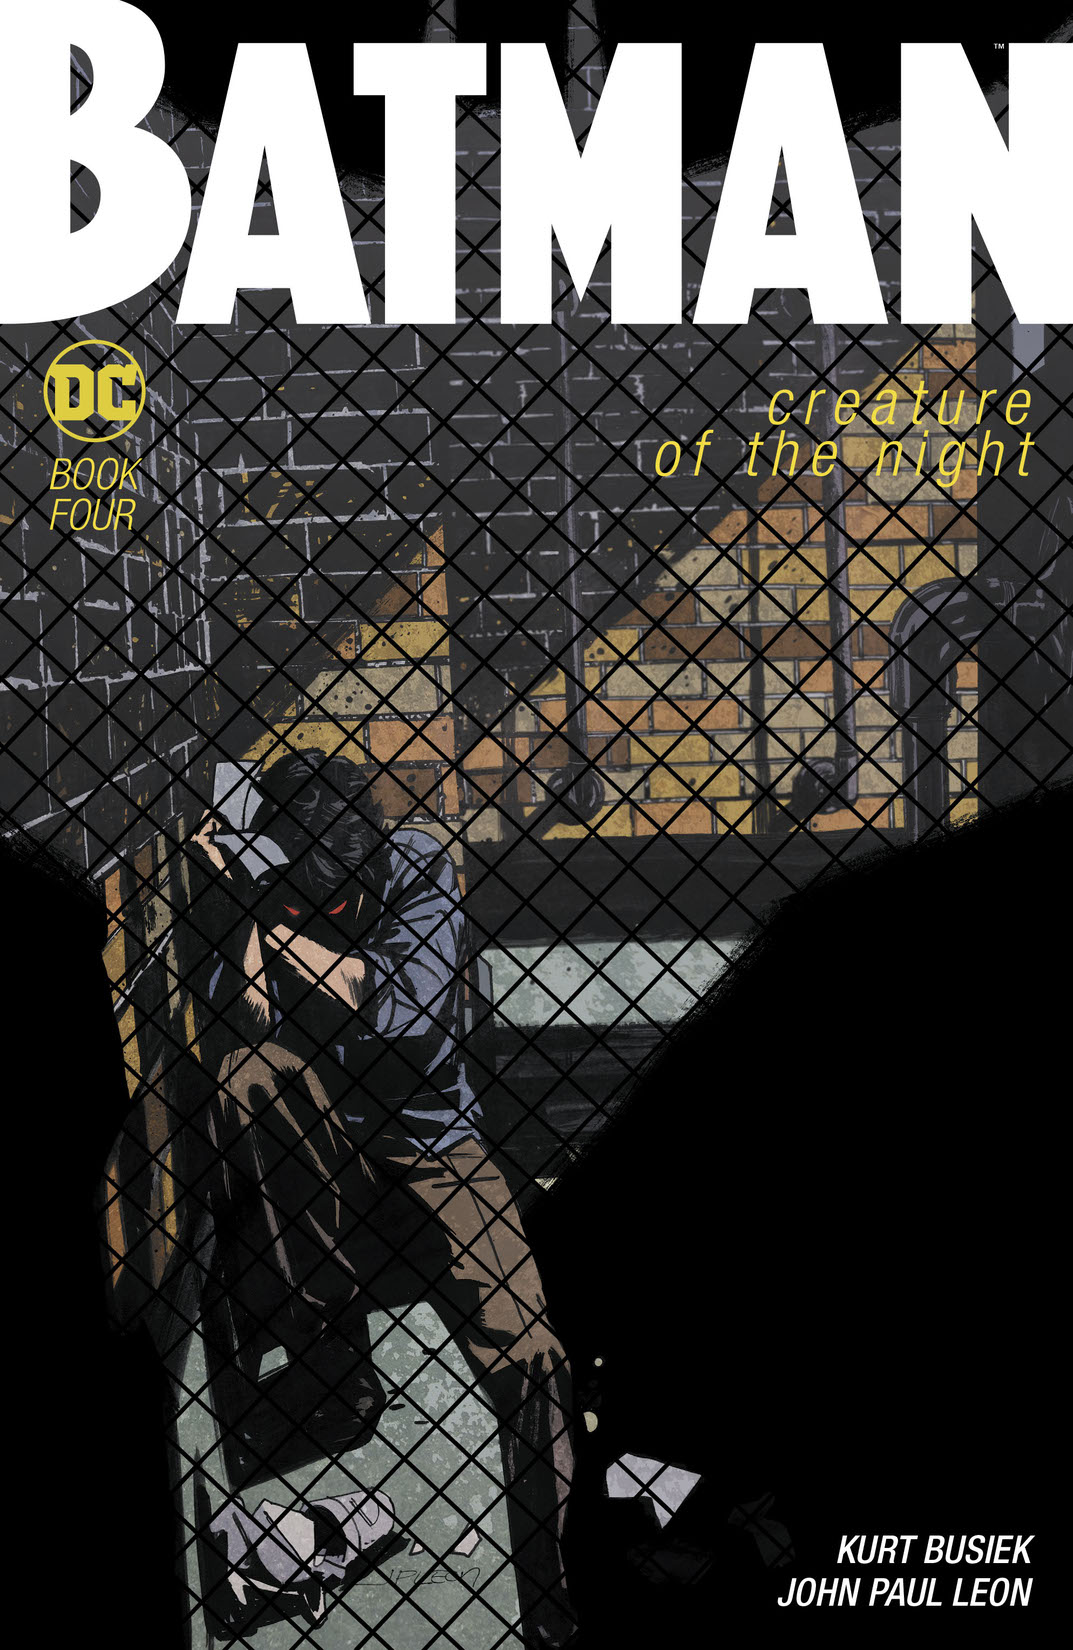 Batman: Creature of the Night #4 preview images